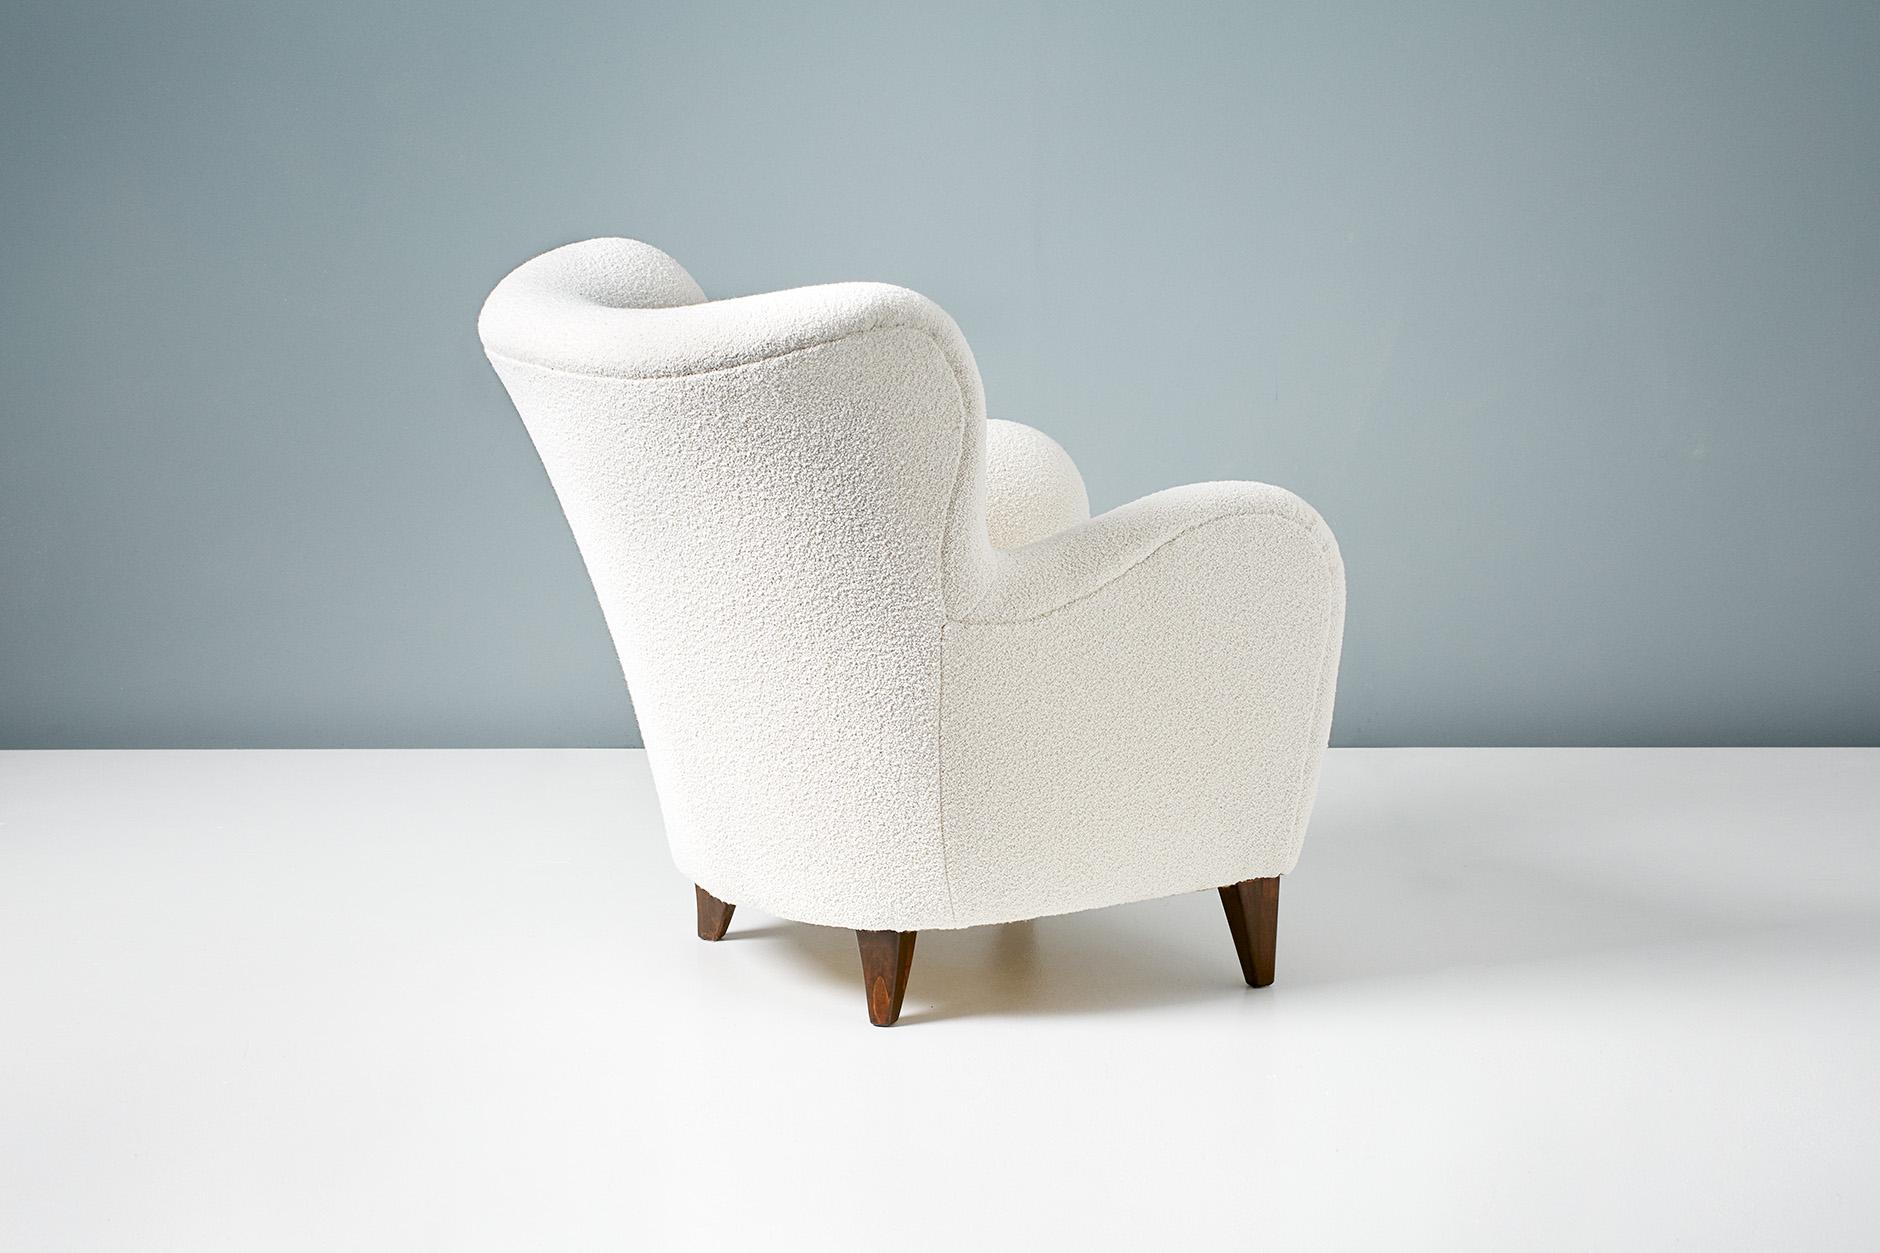 A pair of Danish cabinetmaker 1940s lounge chairs reupholstered in luxurious cotton-wool blend off-white bouclé fabric from Chase Erwin in England.

This pair of chairs were made in Denmark in the 1940s. The legs are walnut-stained solid